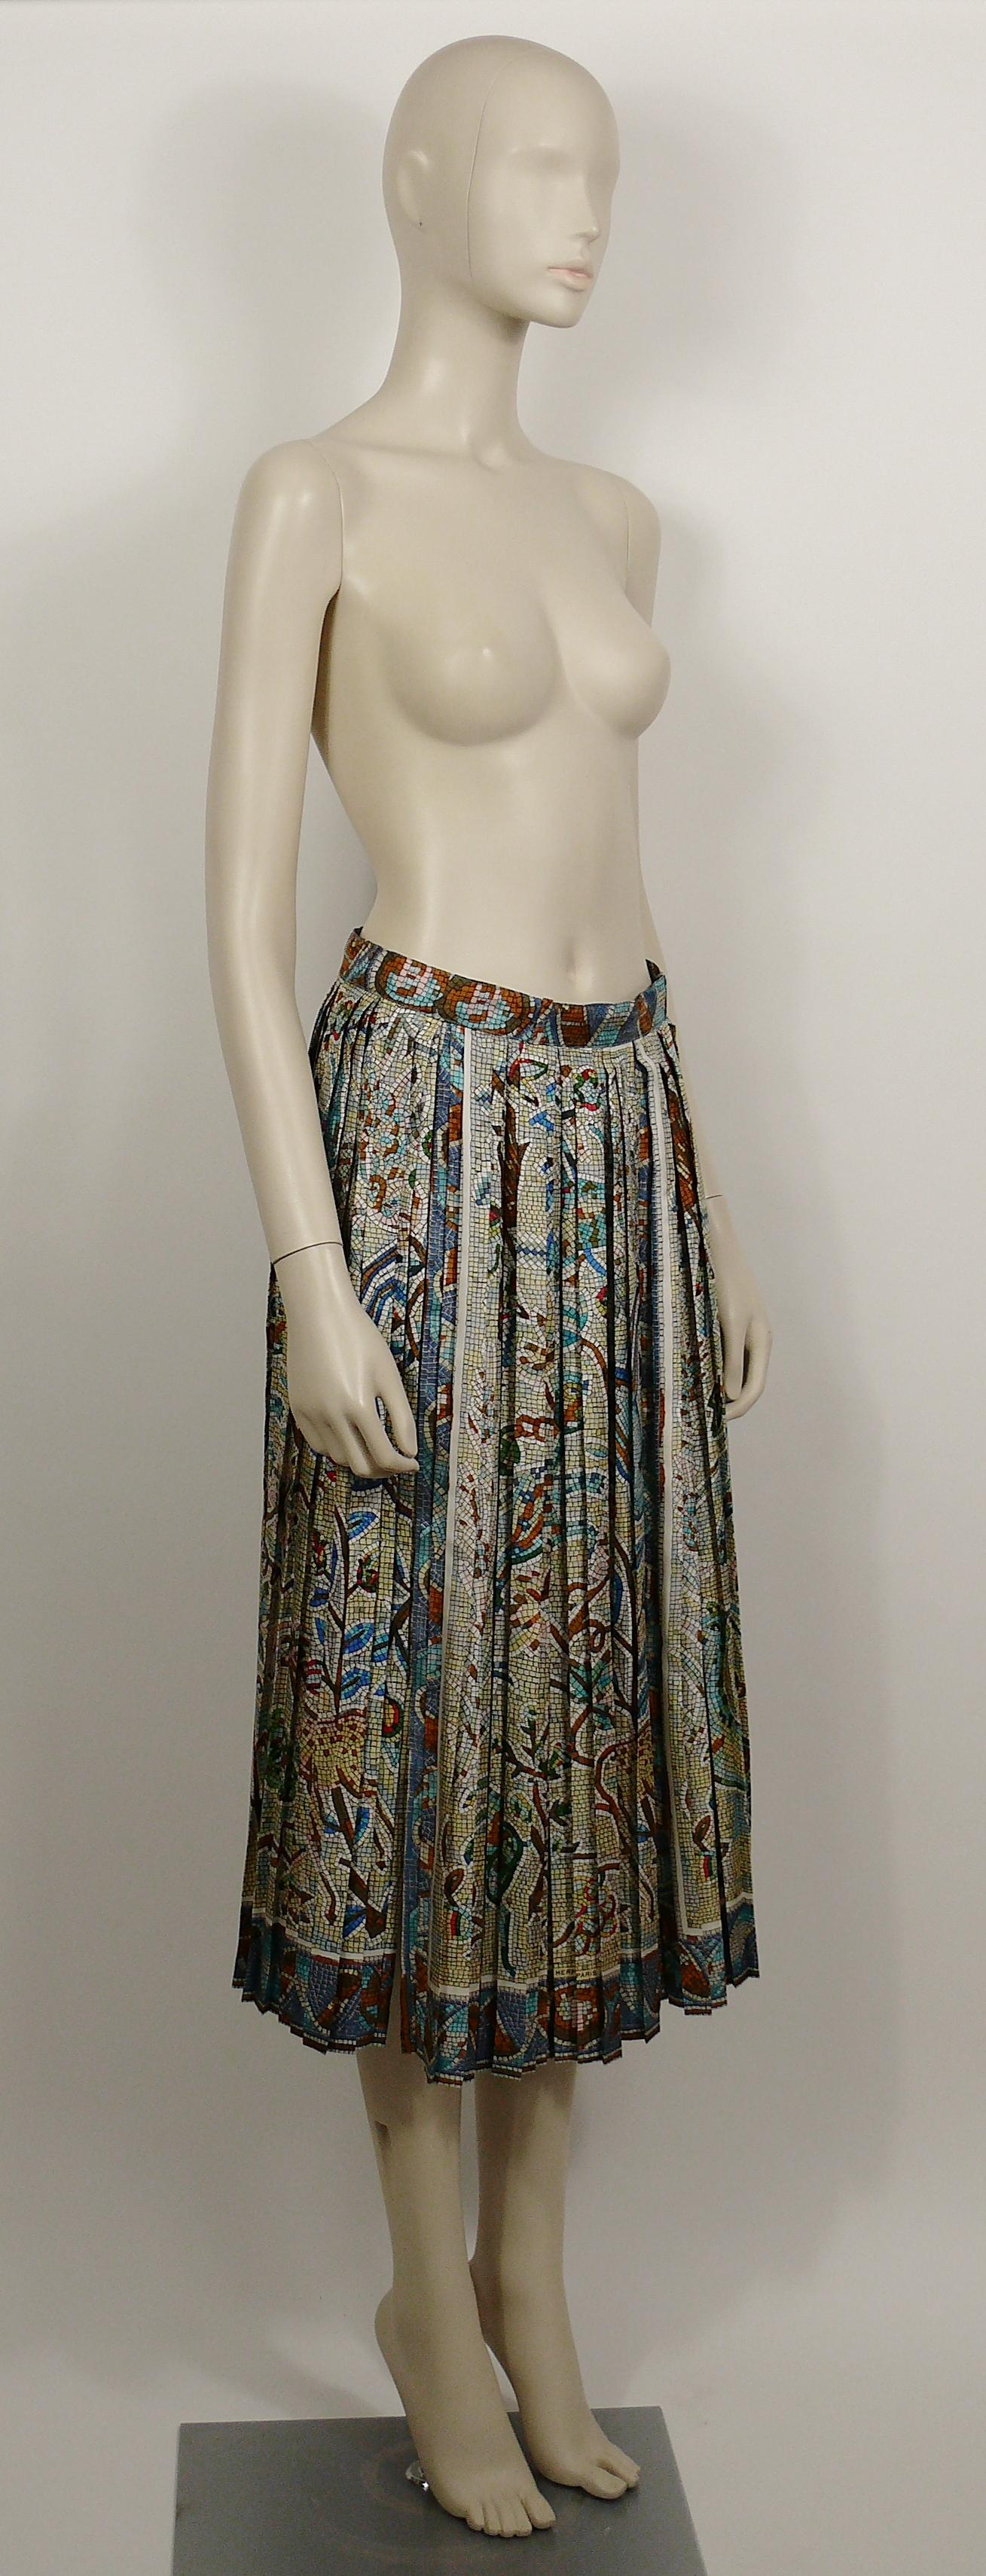 HERMES vintage rare PAVEMENT print pleated silk skirt featuring a gorgeous ancient flora and fauna mosaic design.

Hidden zippered side closure.
Belt loops.
One side slit.
No lining.

Labels read HERMES Paris Exclusif Made in France.

Size label